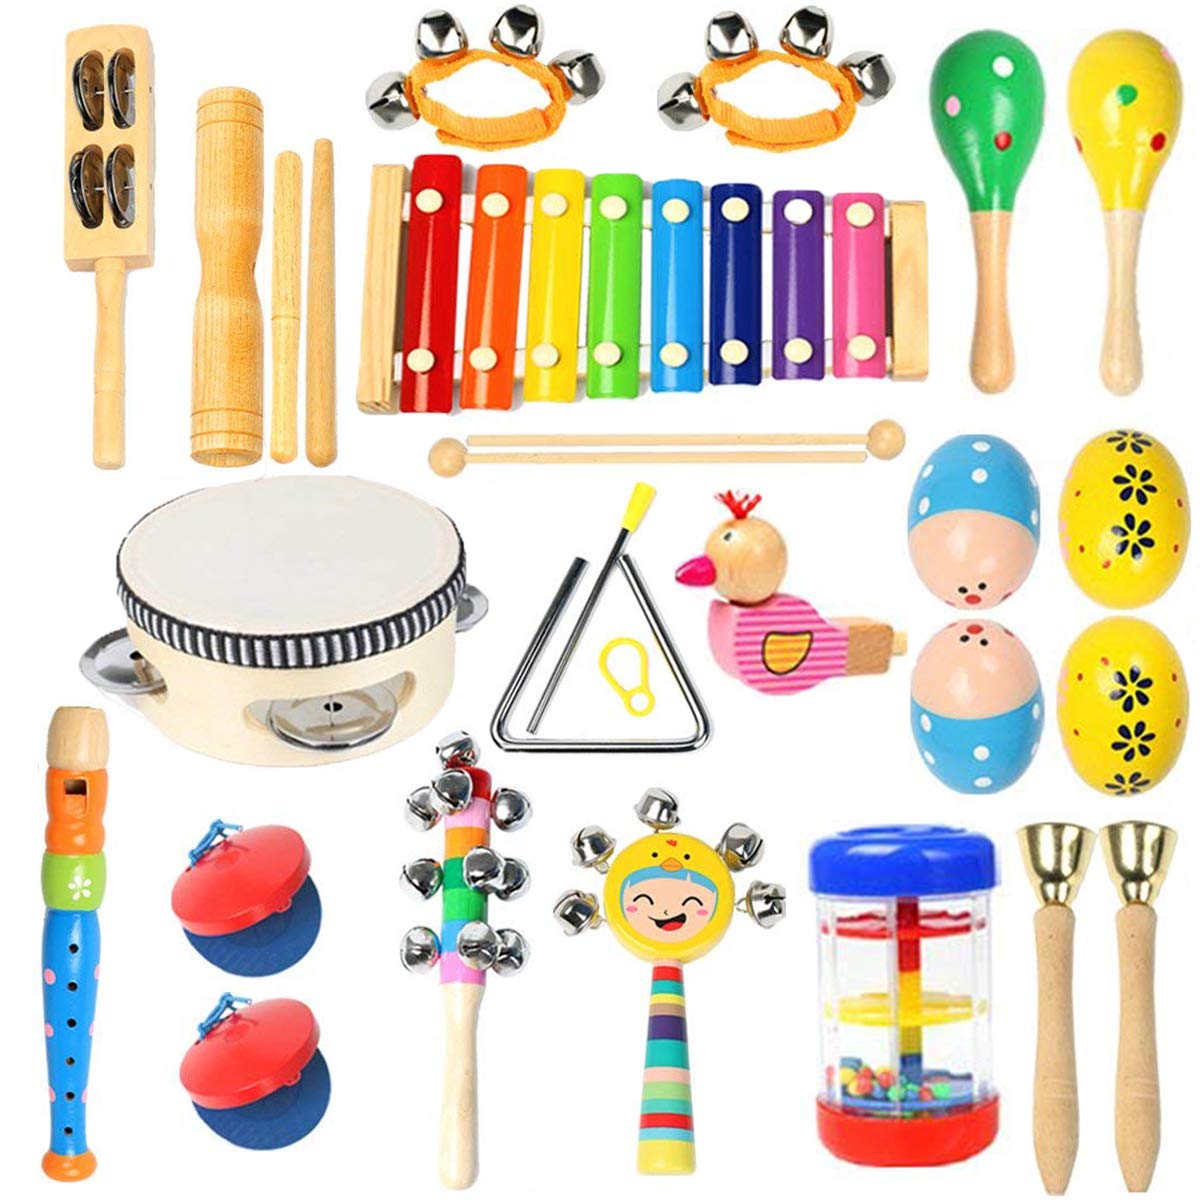 Toddler Musical Instruments- Ehome 15 Types 22pcs Wooden Percussion Instruments Toy